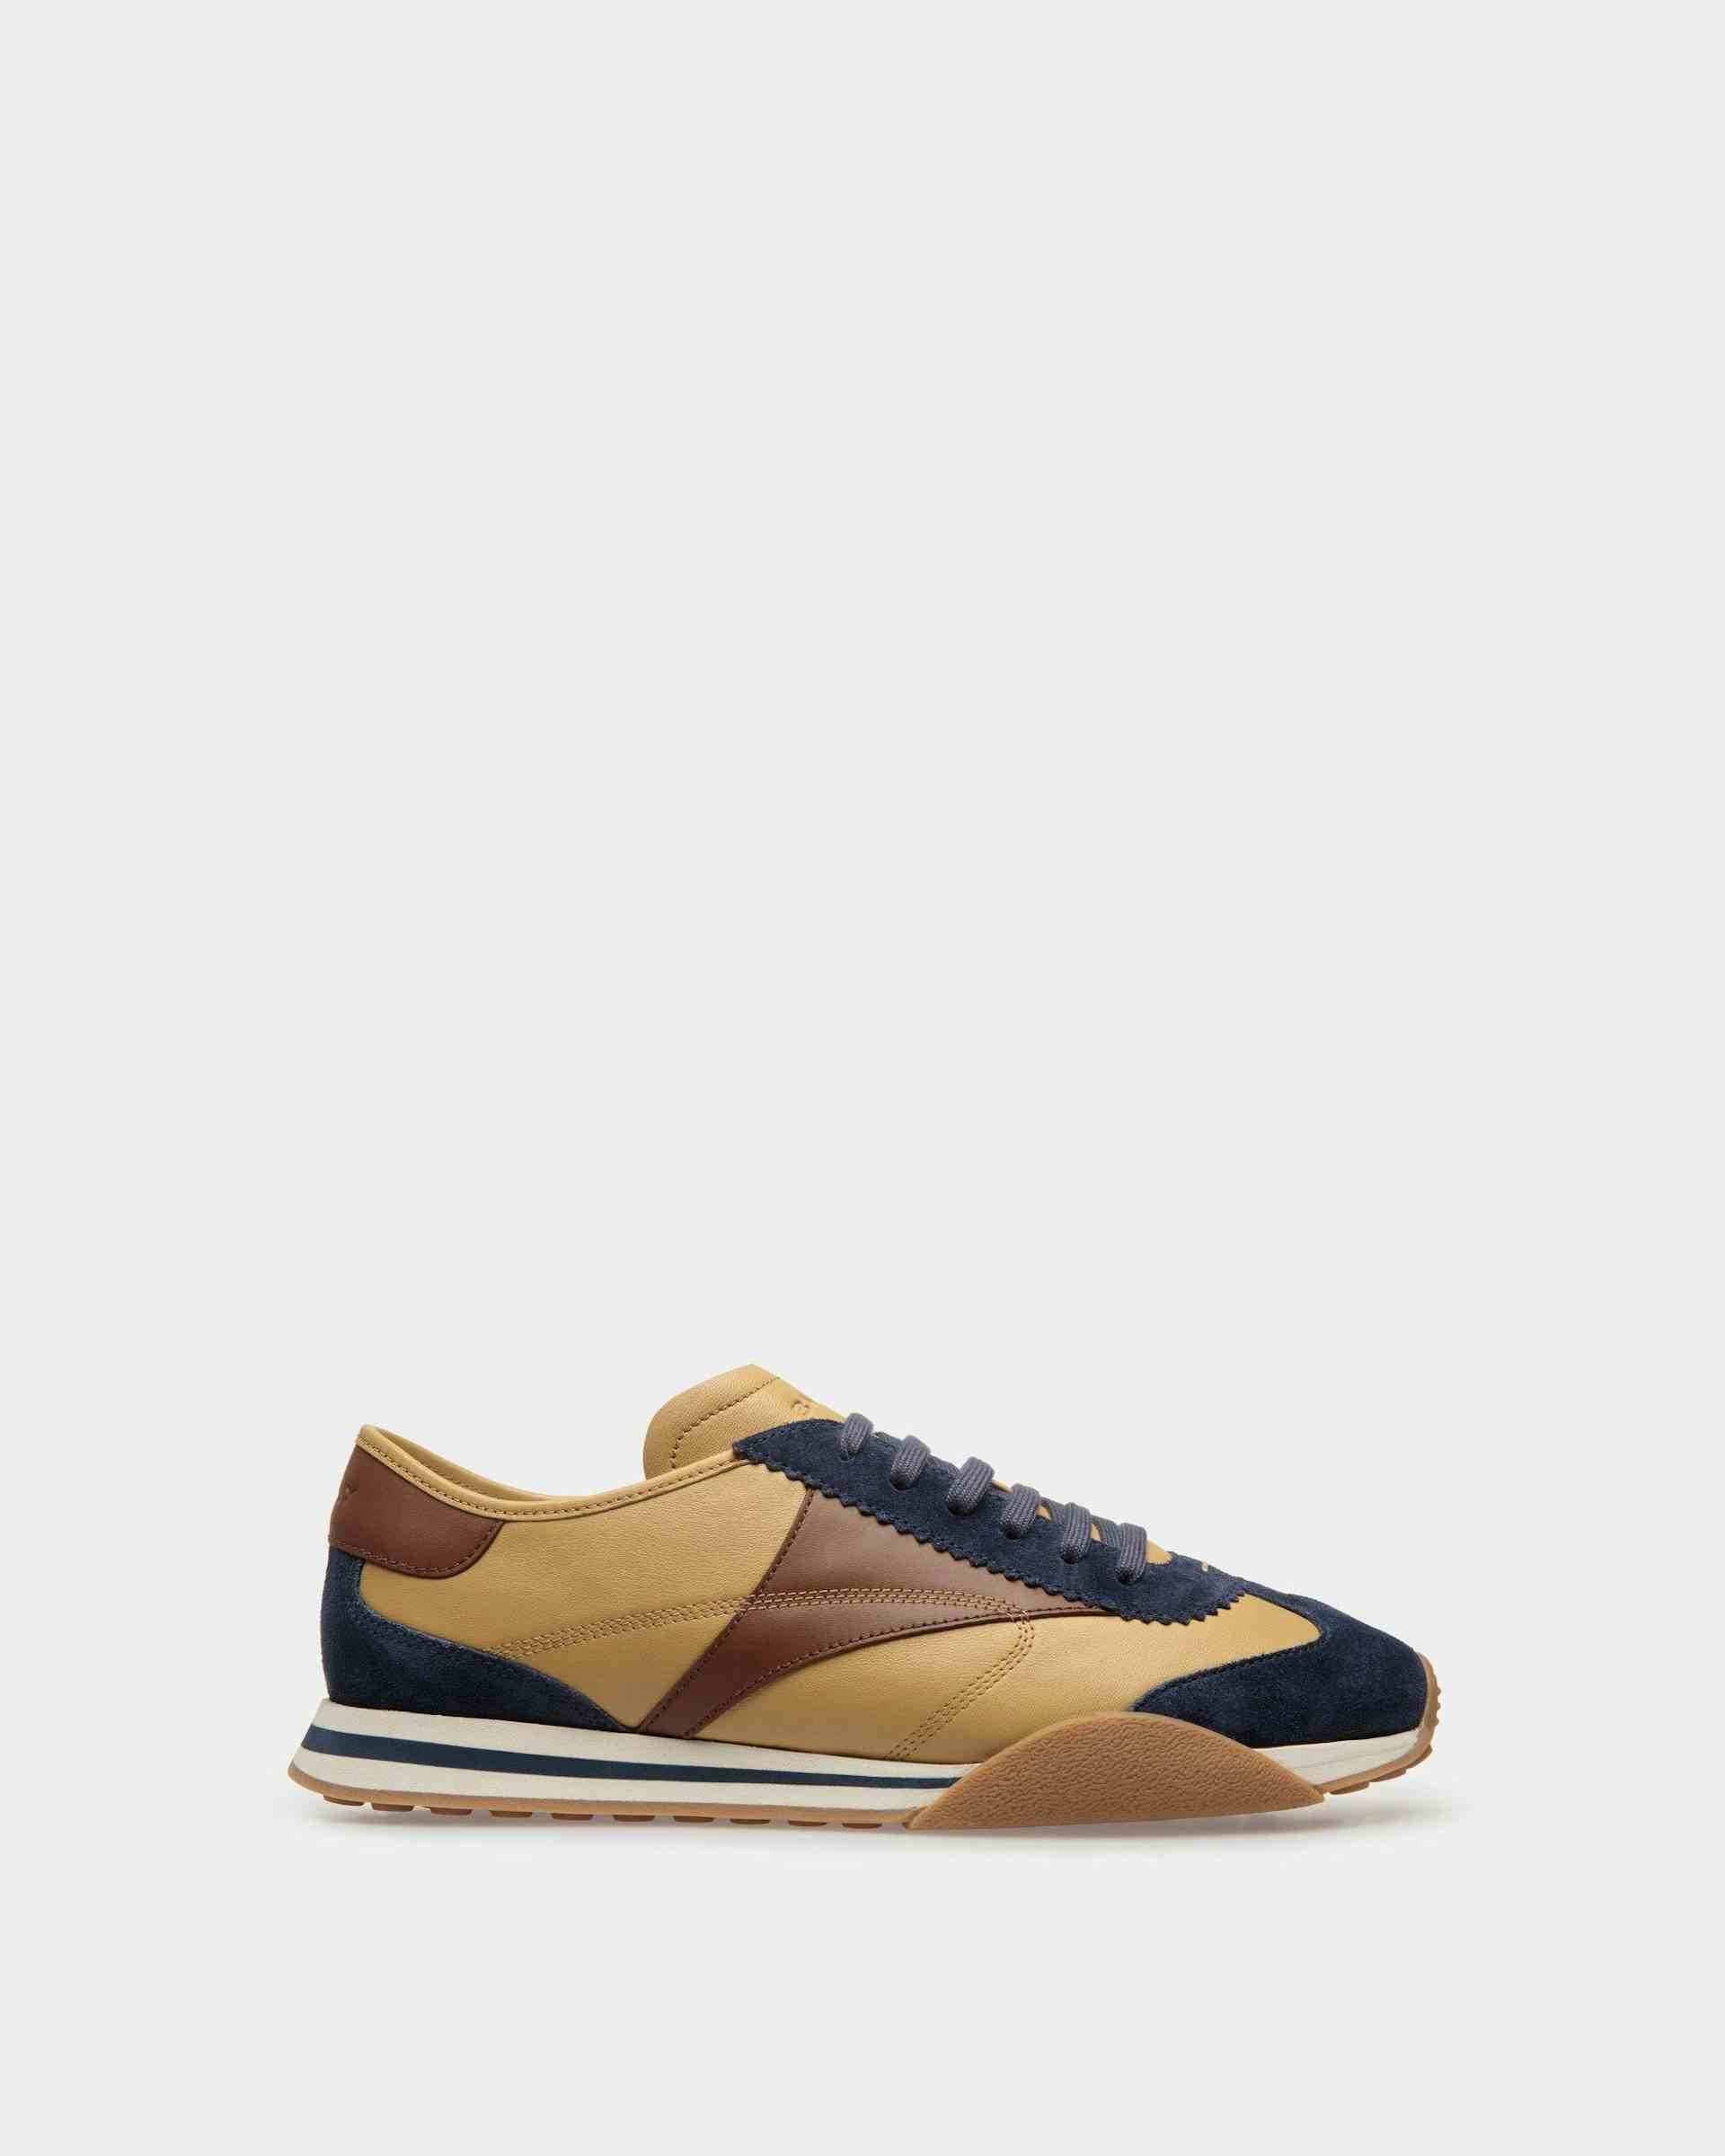 Sussex Sneakers In Marine And Brown Leather - Men's - Bally